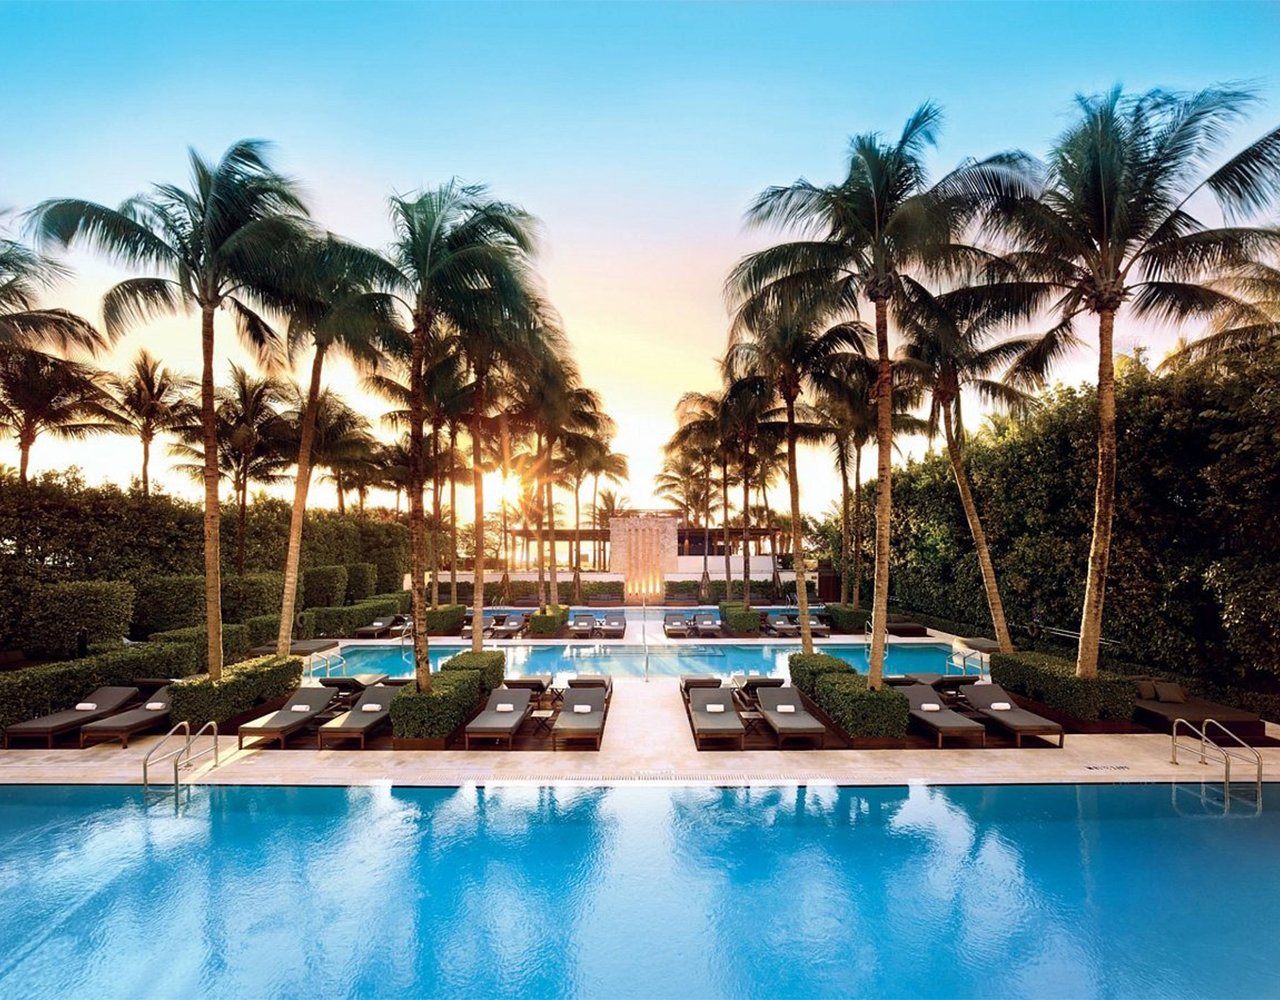 THE 7 BEST HOTELS IN MIAMI